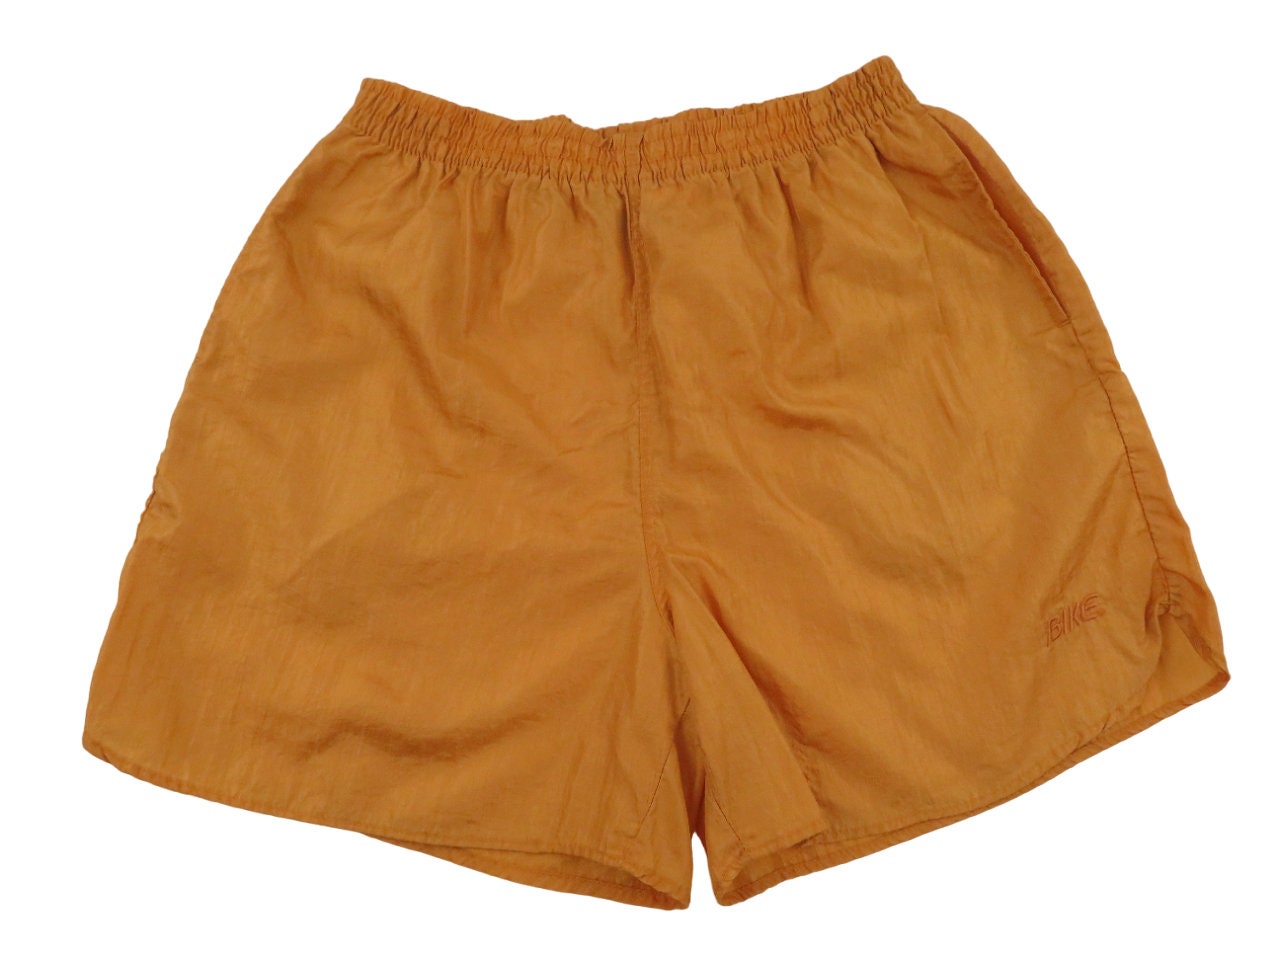 90's / Y2K Yellow Gym Shorts 28 Small Size Vintage Sports